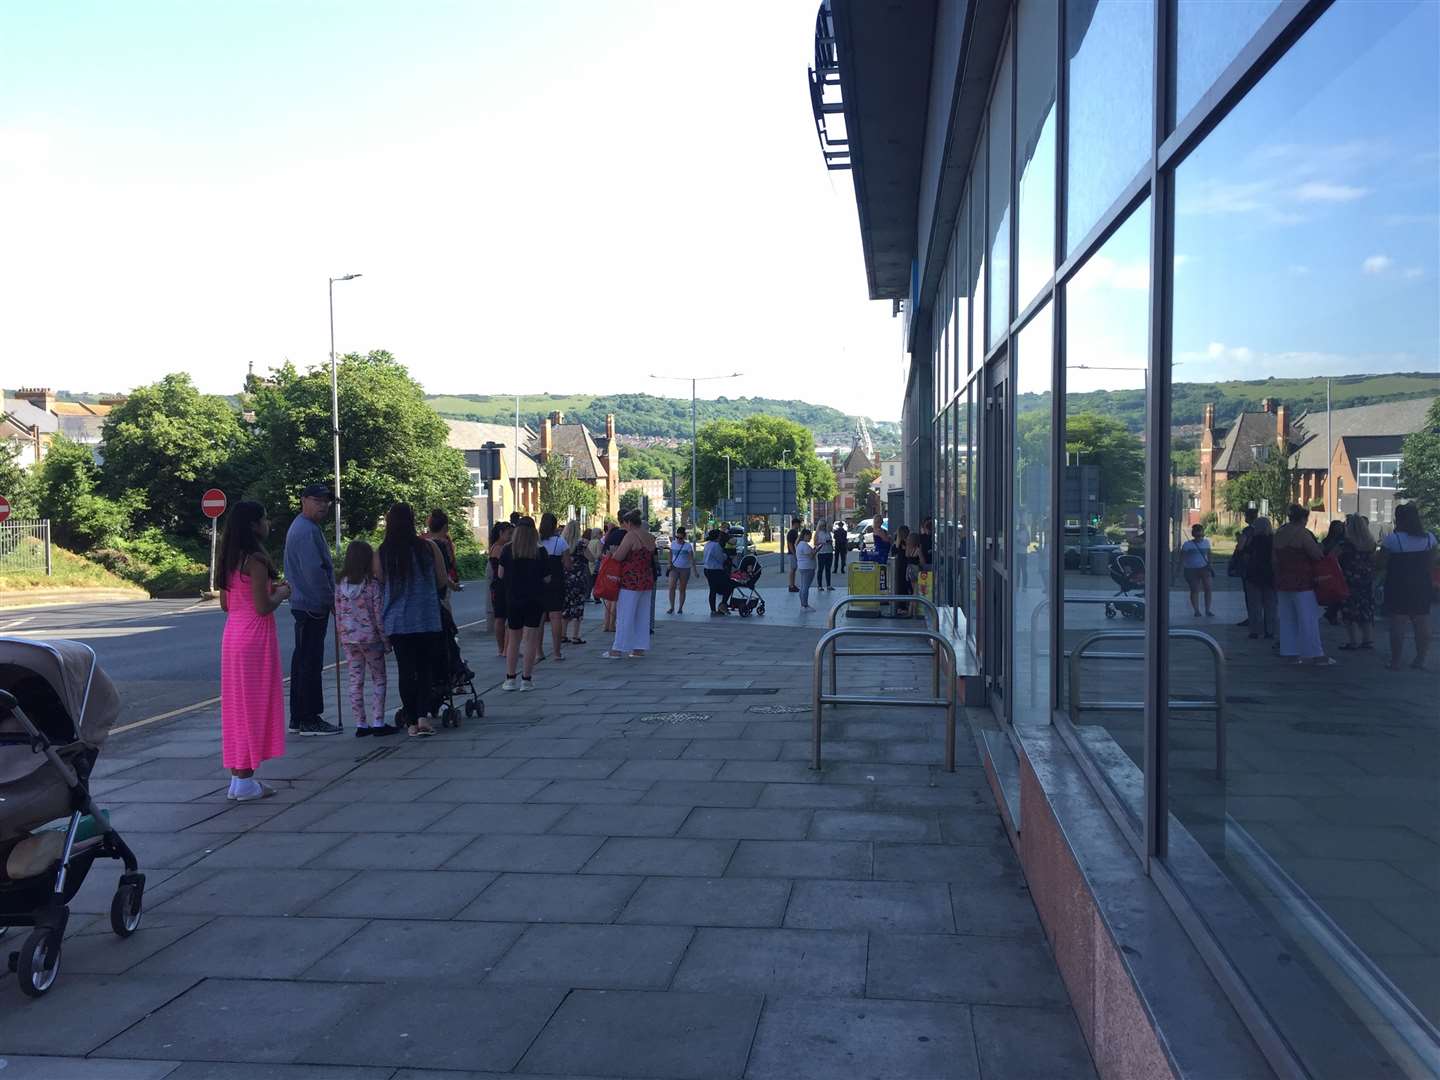 In fact, the queue for Primark went around the corner at one point